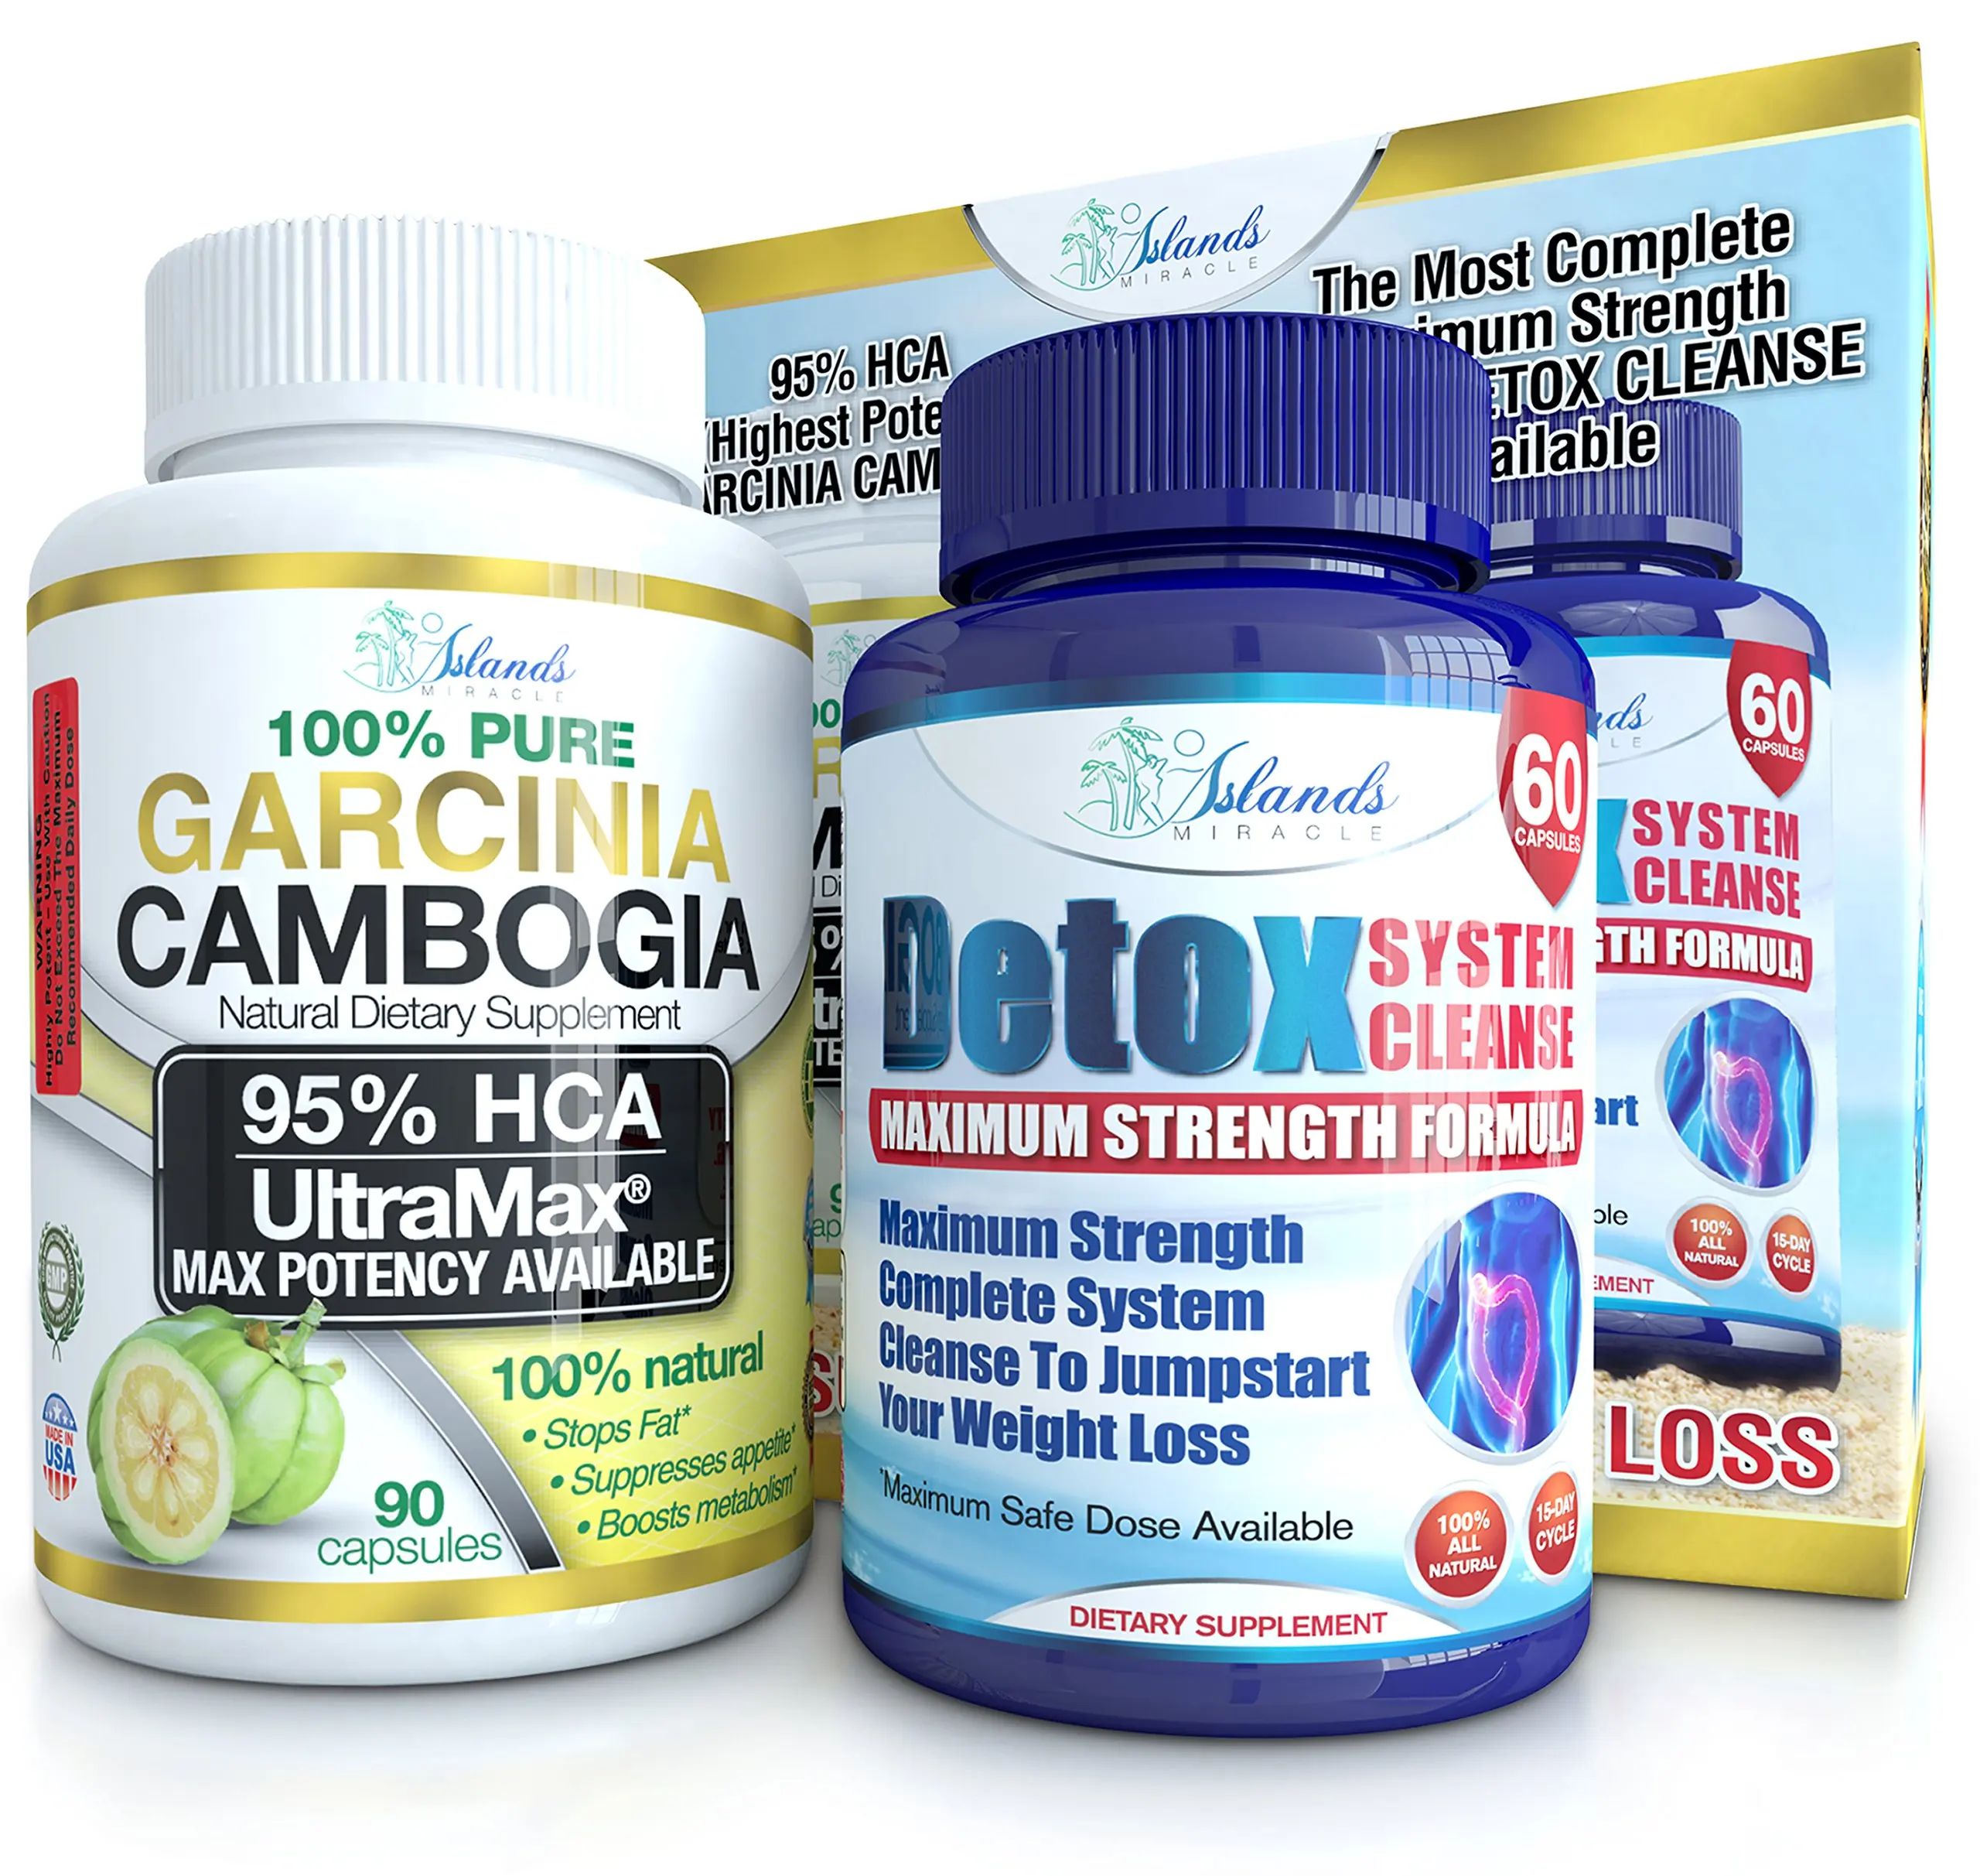 Detox Cleanse Combo Pack To Jumpstart Your Weight Loss - 95% HCA Pure Extra...